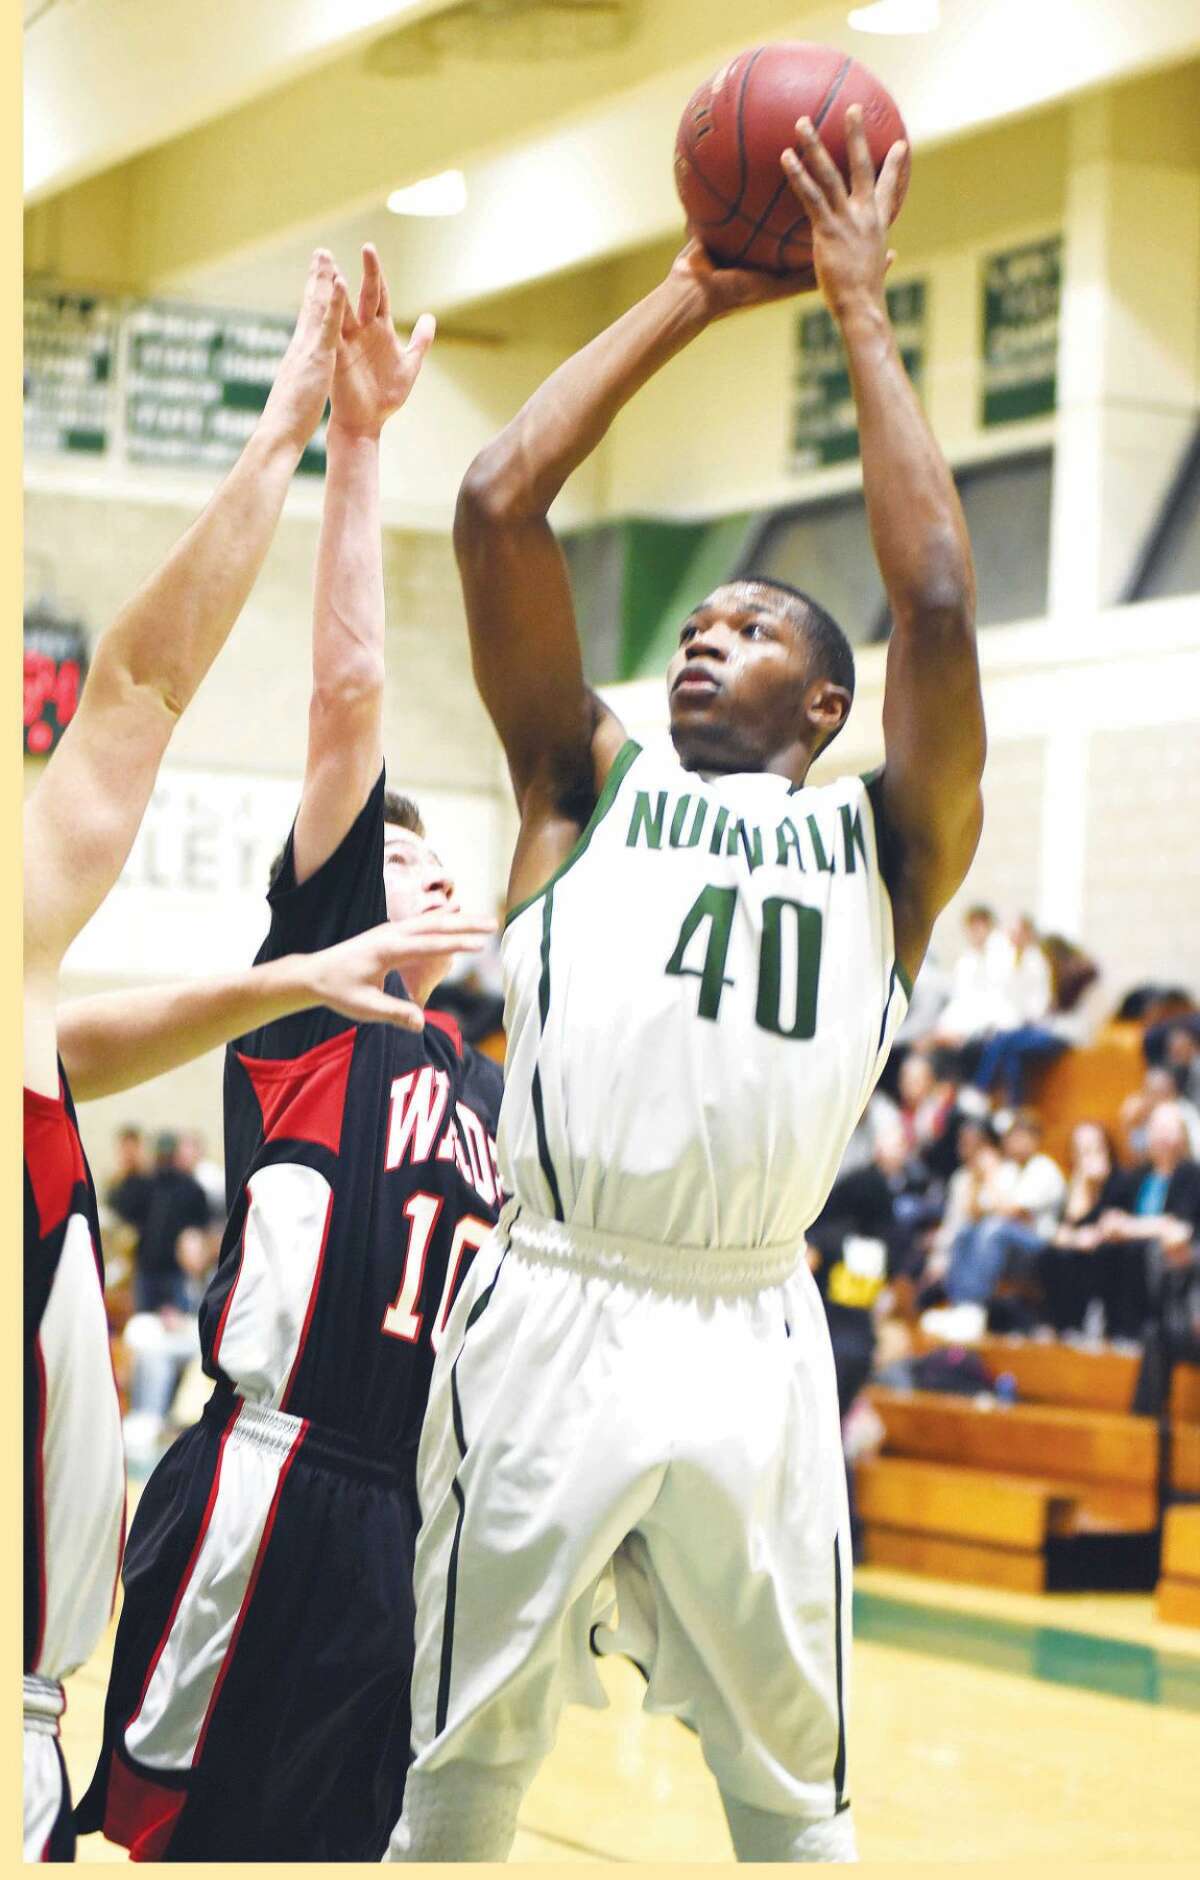 Hour photo/John Nash - Norwalk's Jakari Gainer (40) puts up a shot during Tuesday's game against Fairfield Warde.